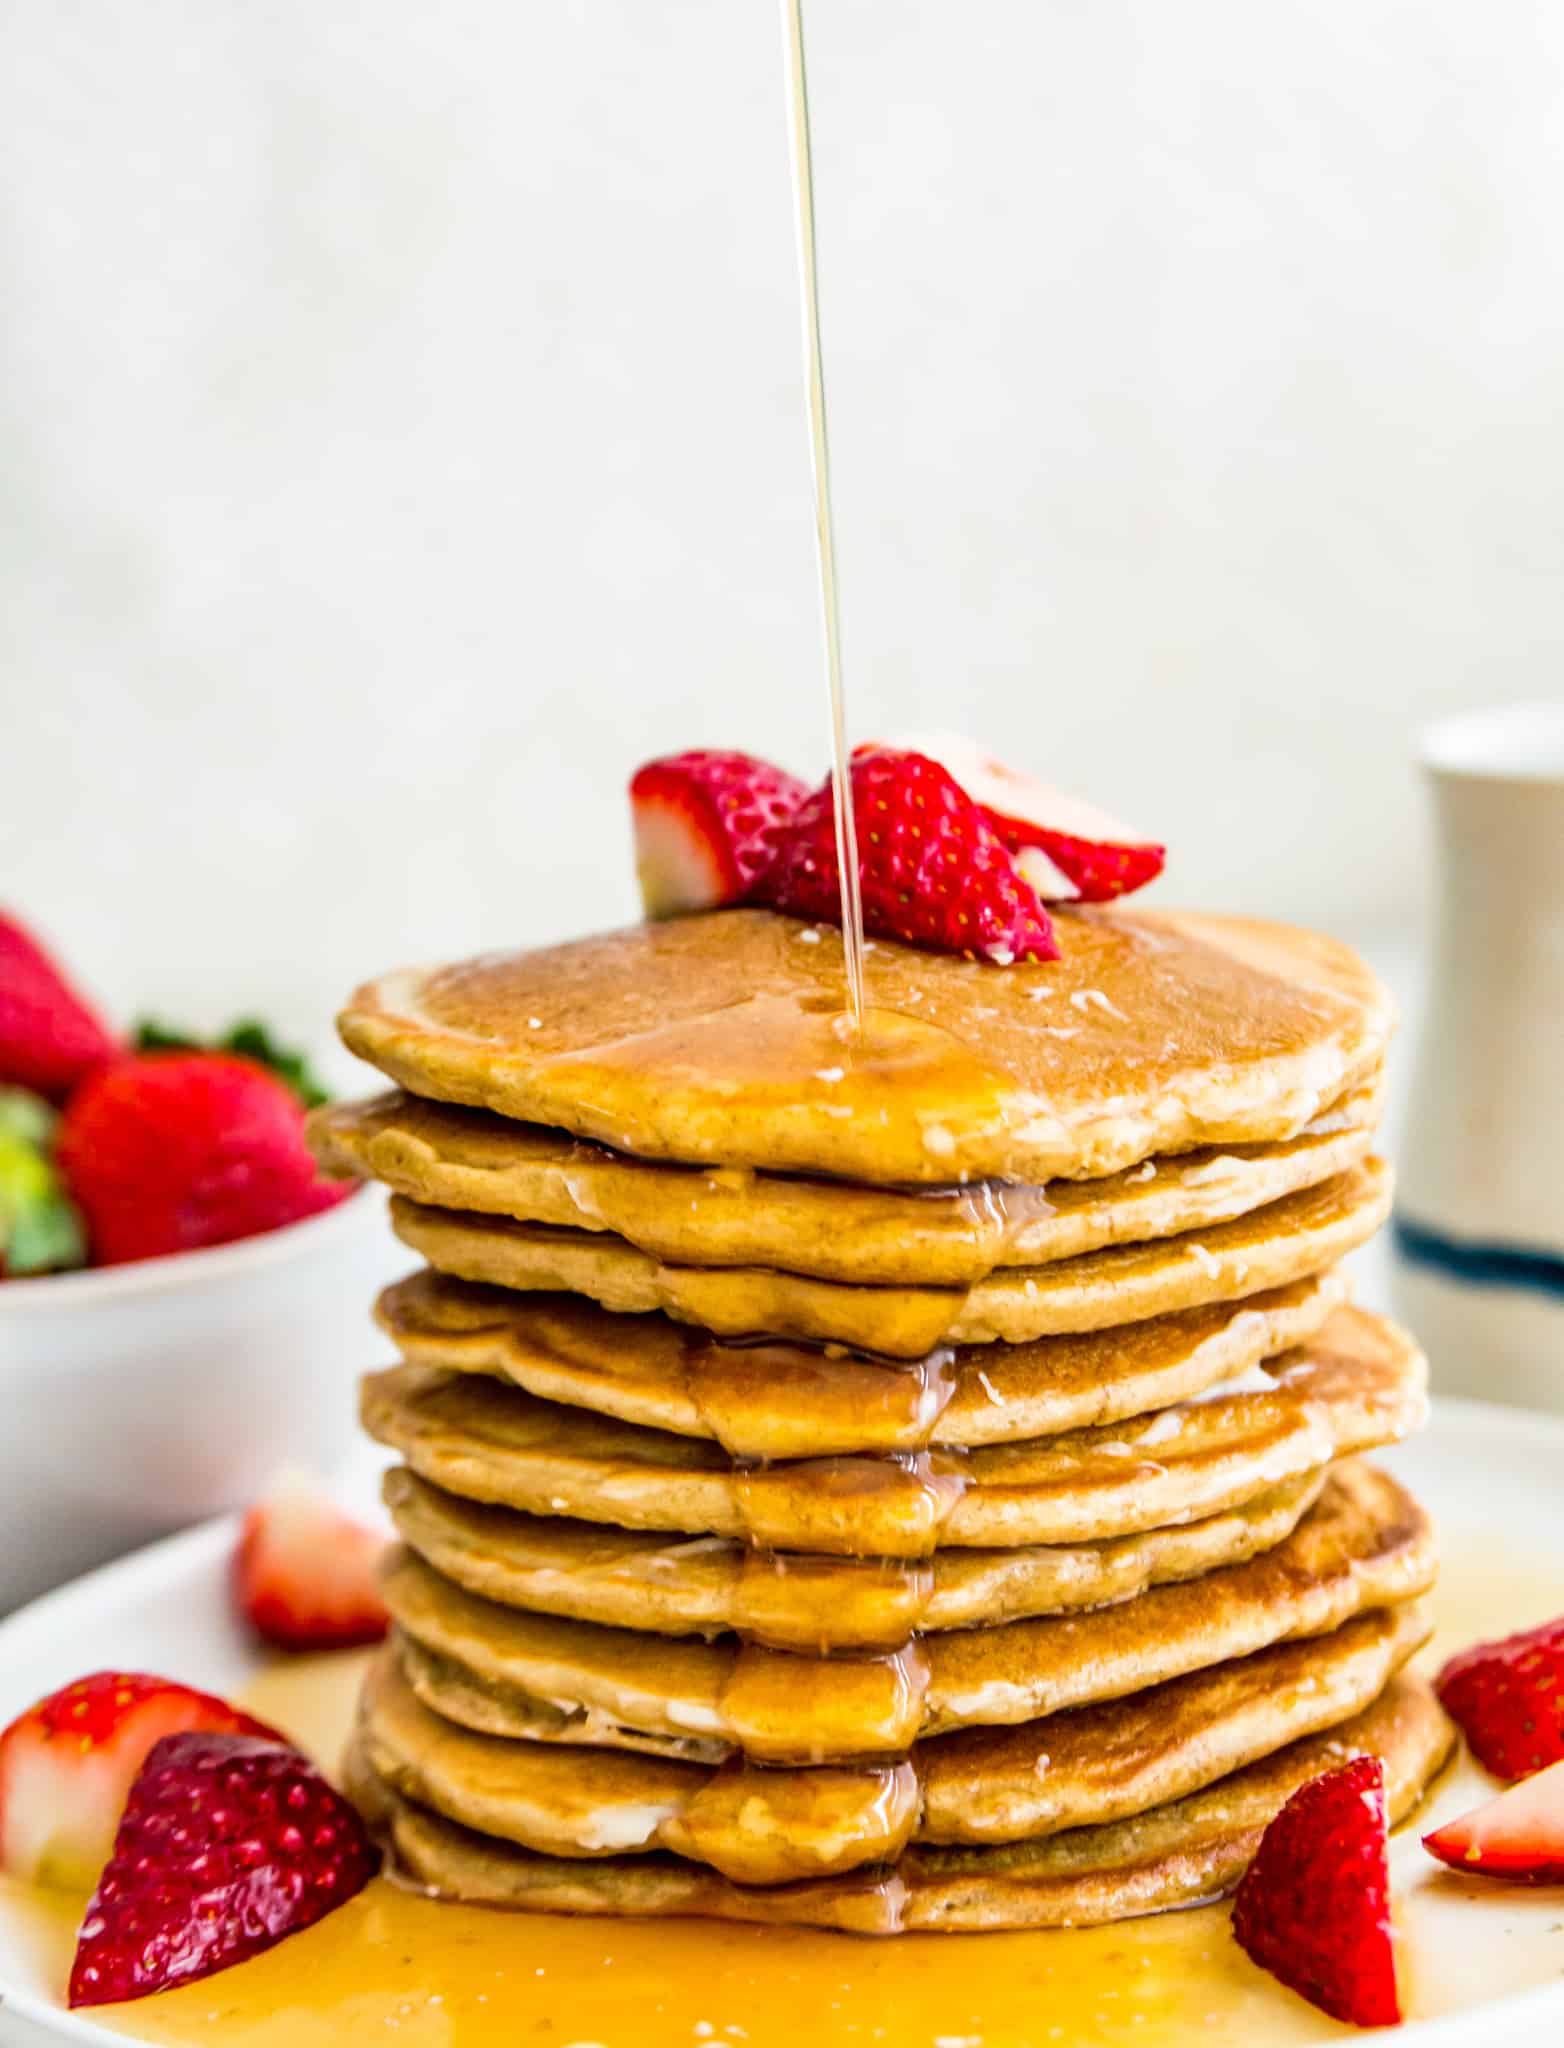 A stack of oat flour pancakes with syrup being poured on them.